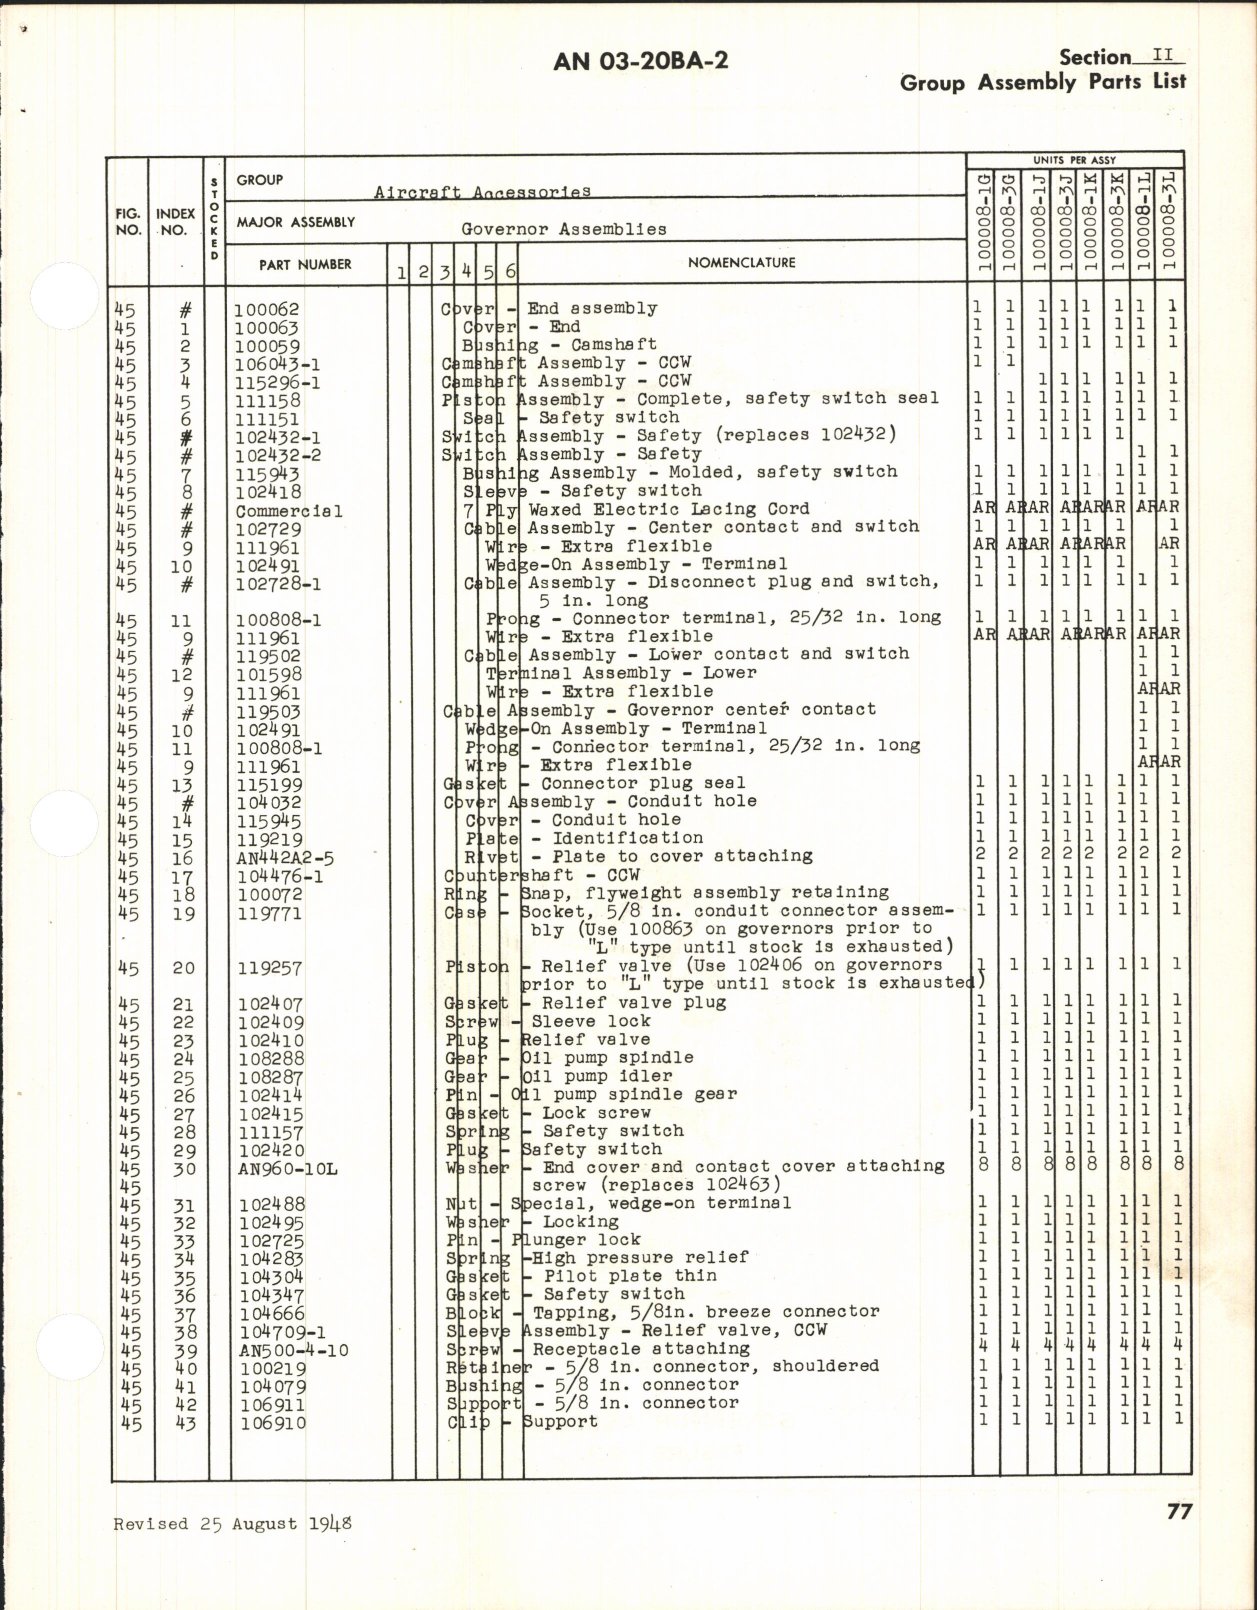 Sample page 7 from AirCorps Library document: Parts Catalog for Electric Propeller Governor and Propeller Controls